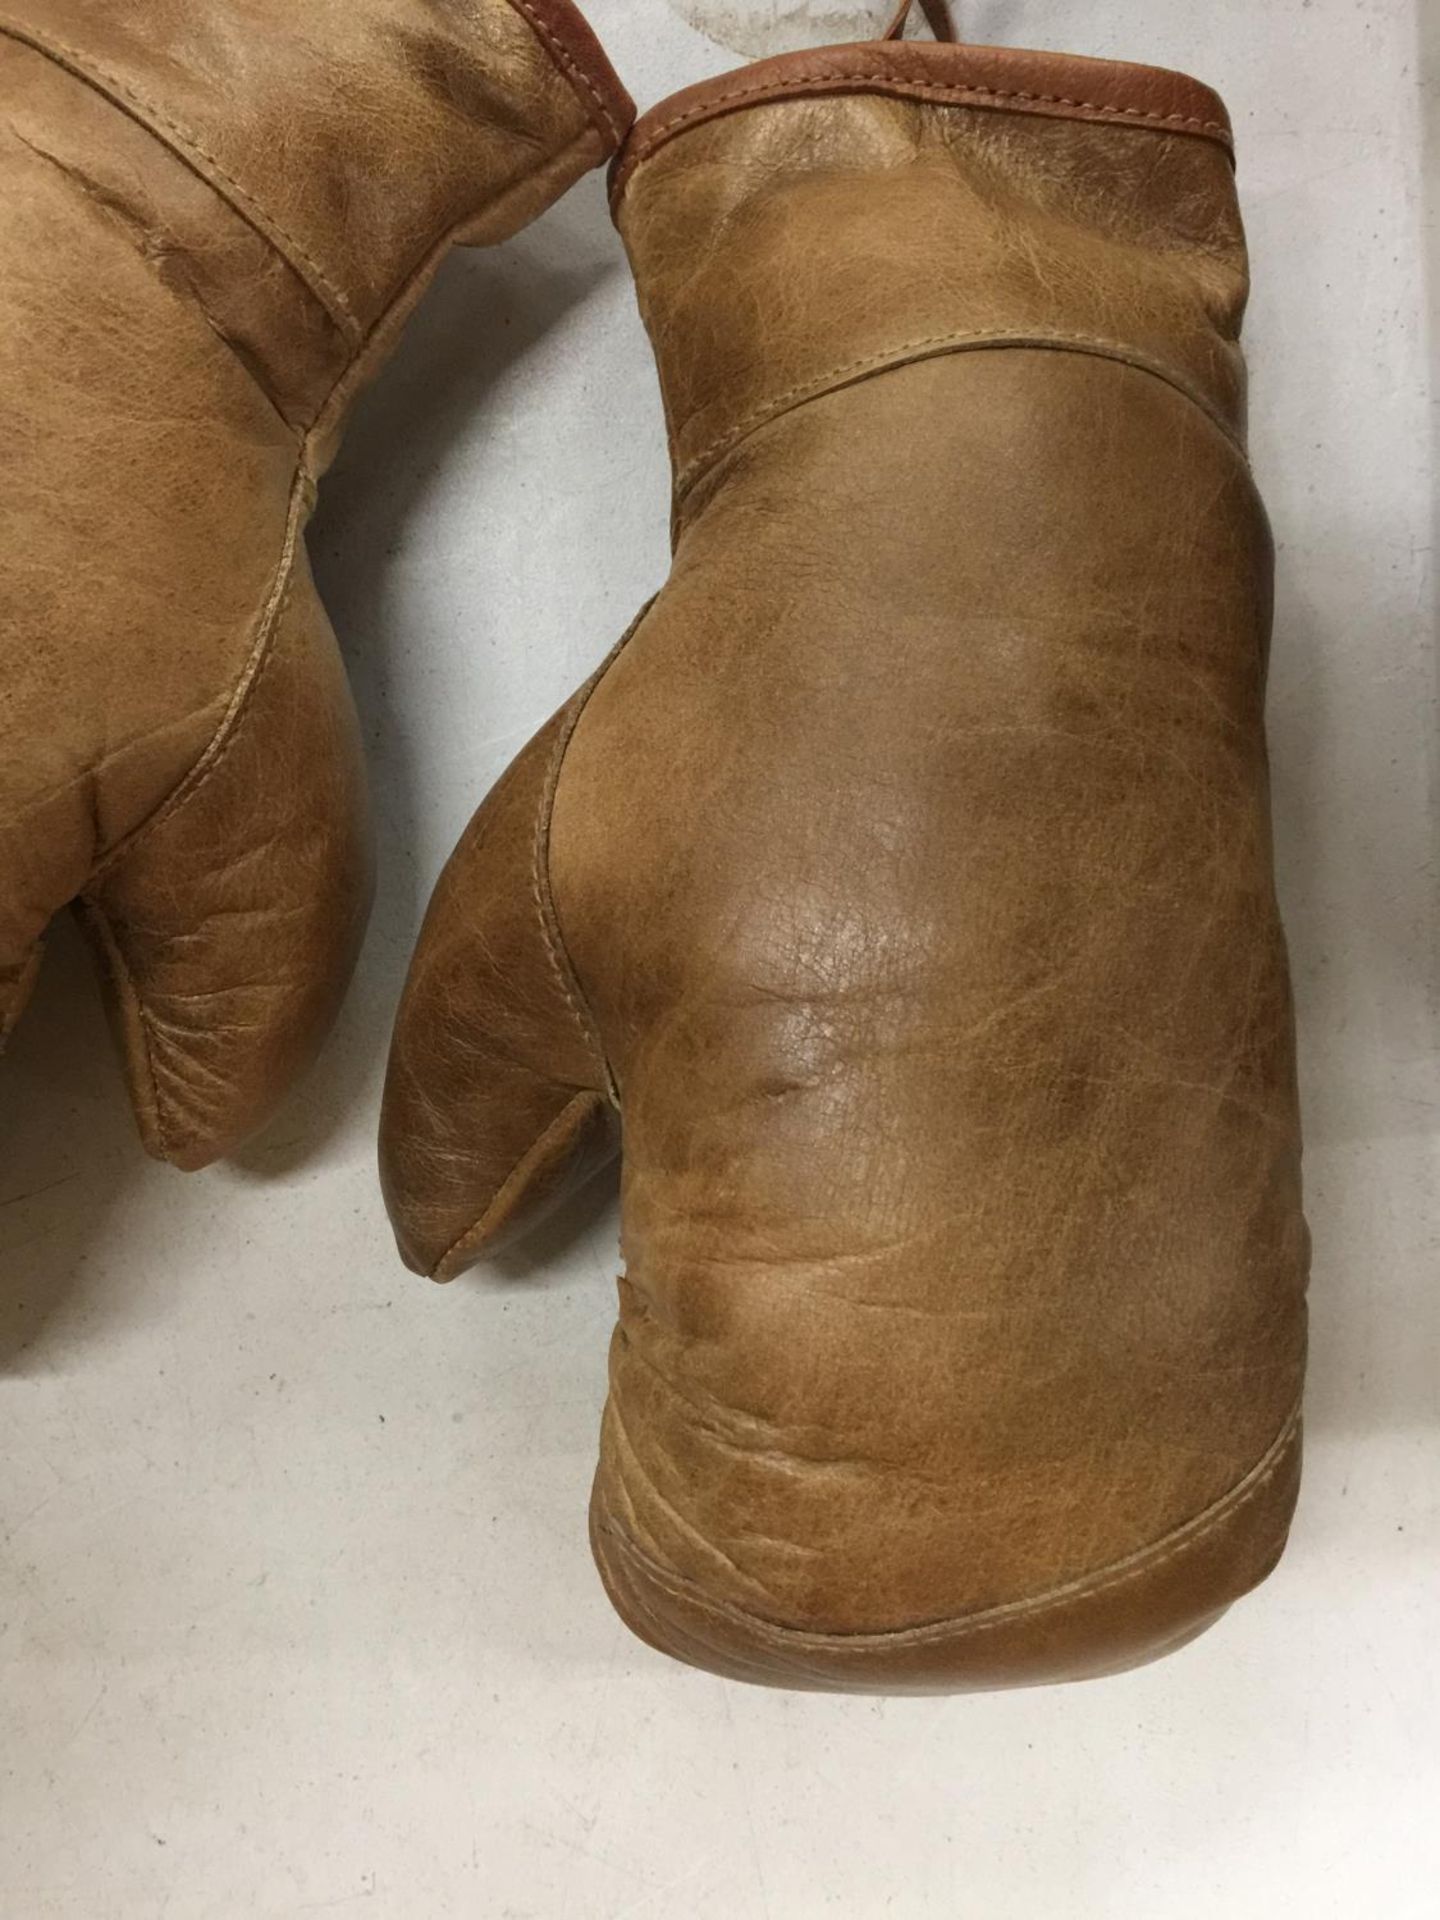 A PAIR OF VINTAGE BOXING GLOVES - Image 2 of 3